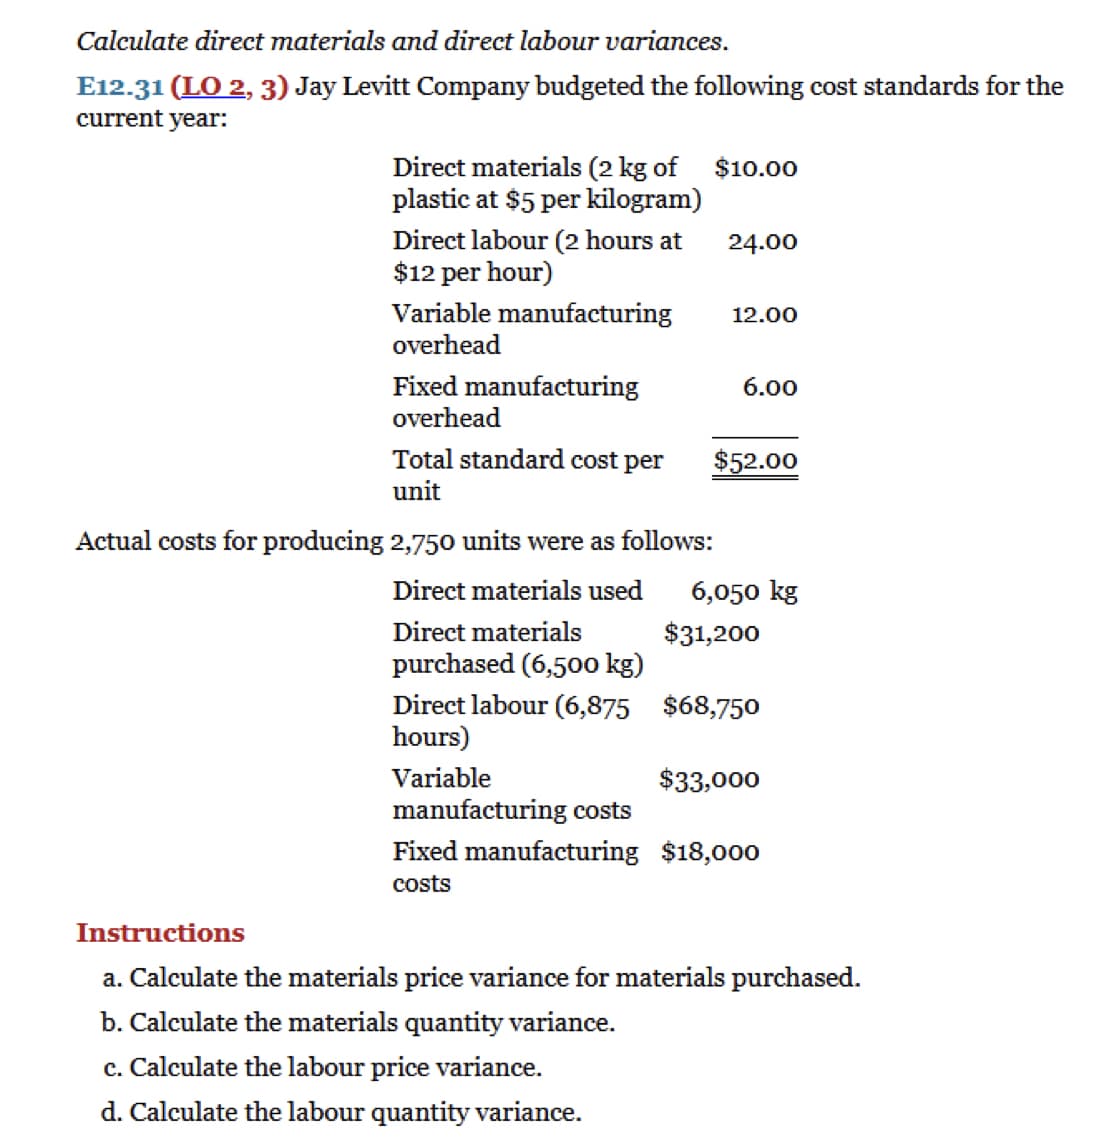 Calculate direct materials and direct labour variances.
E12.31 (LO 2, 3) Jay Levitt Company budgeted the following cost standards for the
current year:
Direct materials (2 kg of $10.00
plastic at $5 per kilogram)
Direct labour (2 hours at
$12 per hour)
Variable manufacturing
overhead
Fixed manufacturing
overhead
Total standard cost per
unit
24.00
Actual costs for producing 2,750 units were as follows:
Direct materials used
Direct materials
purchased (6,500 kg)
Direct labour (6,875
hours)
Variable
manufacturing costs
12.00
6.00
$52.00
6,050 kg
$31,200
$68,750
$33,000
Fixed manufacturing $18,000
costs
Instructions
a. Calculate the materials price variance for materials purchased.
b. Calculate the materials quantity variance.
c. Calculate the labour price variance.
d. Calculate the labour quantity variance.